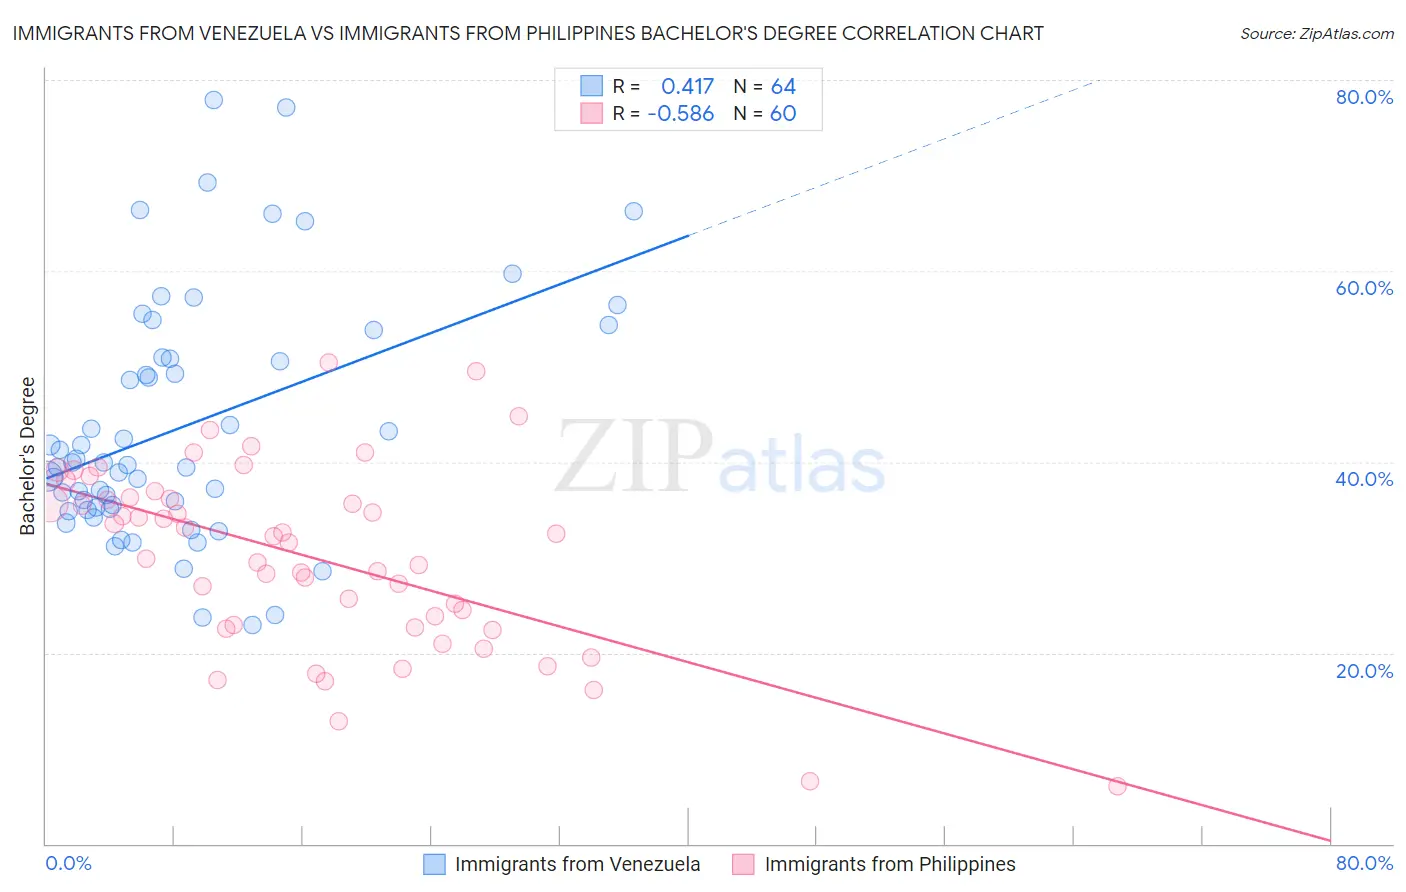 Immigrants from Venezuela vs Immigrants from Philippines Bachelor's Degree